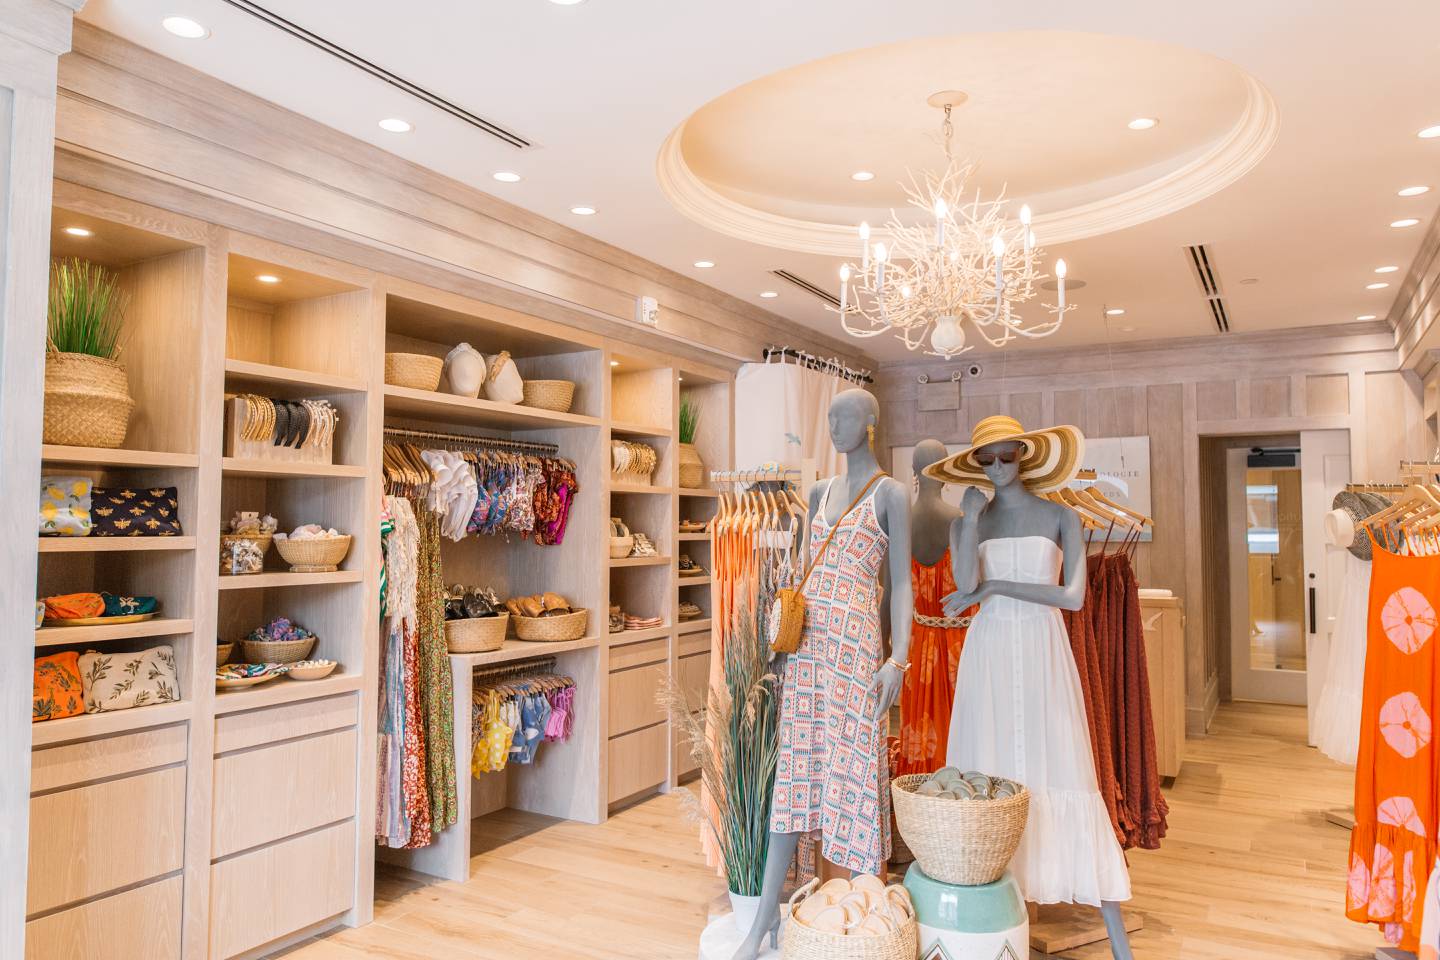 Anthropologie's new pop-up store inside The Reeds at Shelter Haven, a luxury hotel located on the Jersey Shore.